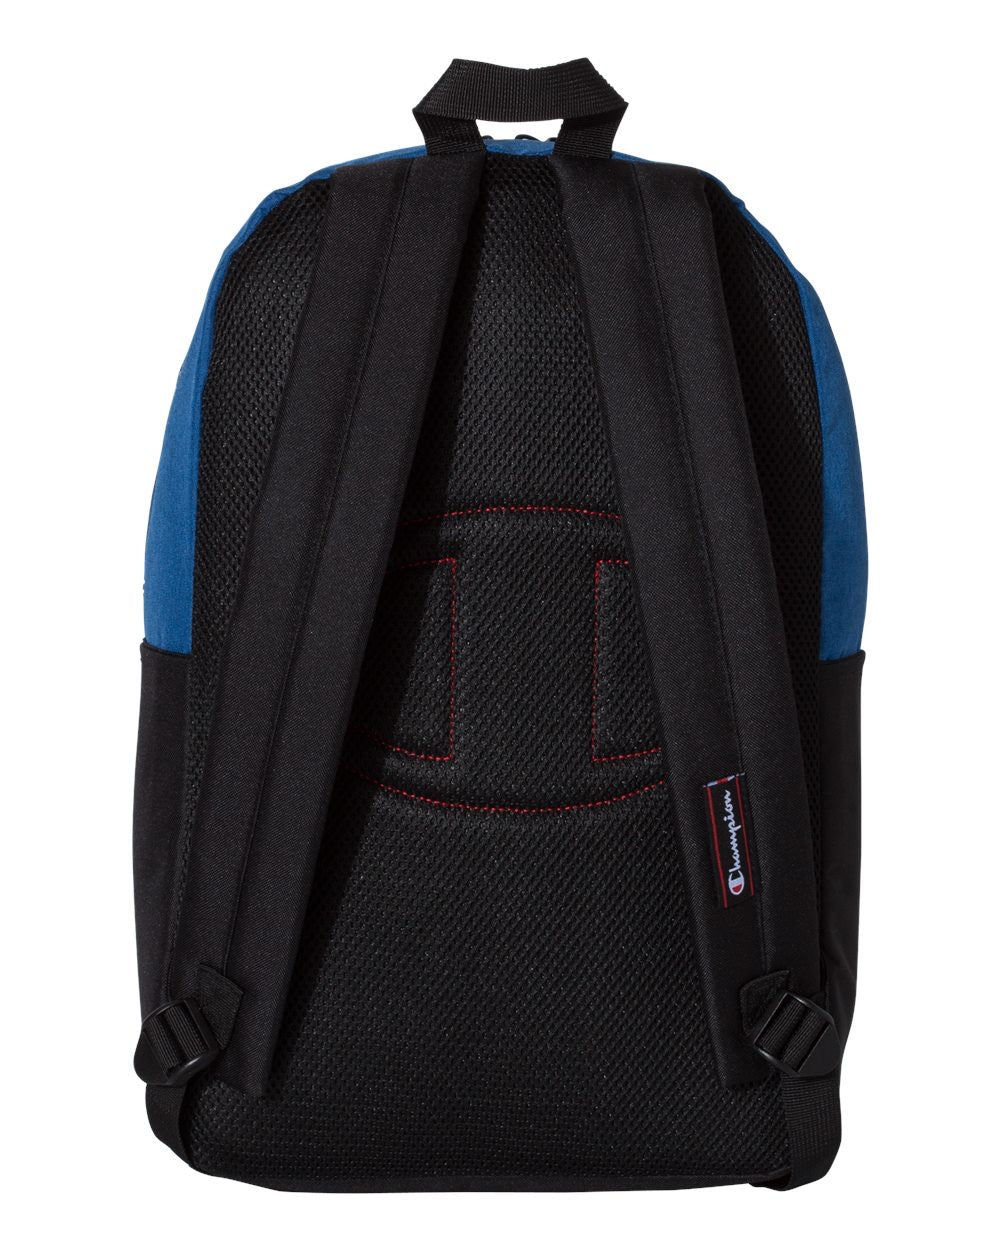 LC Embroidered Backpack